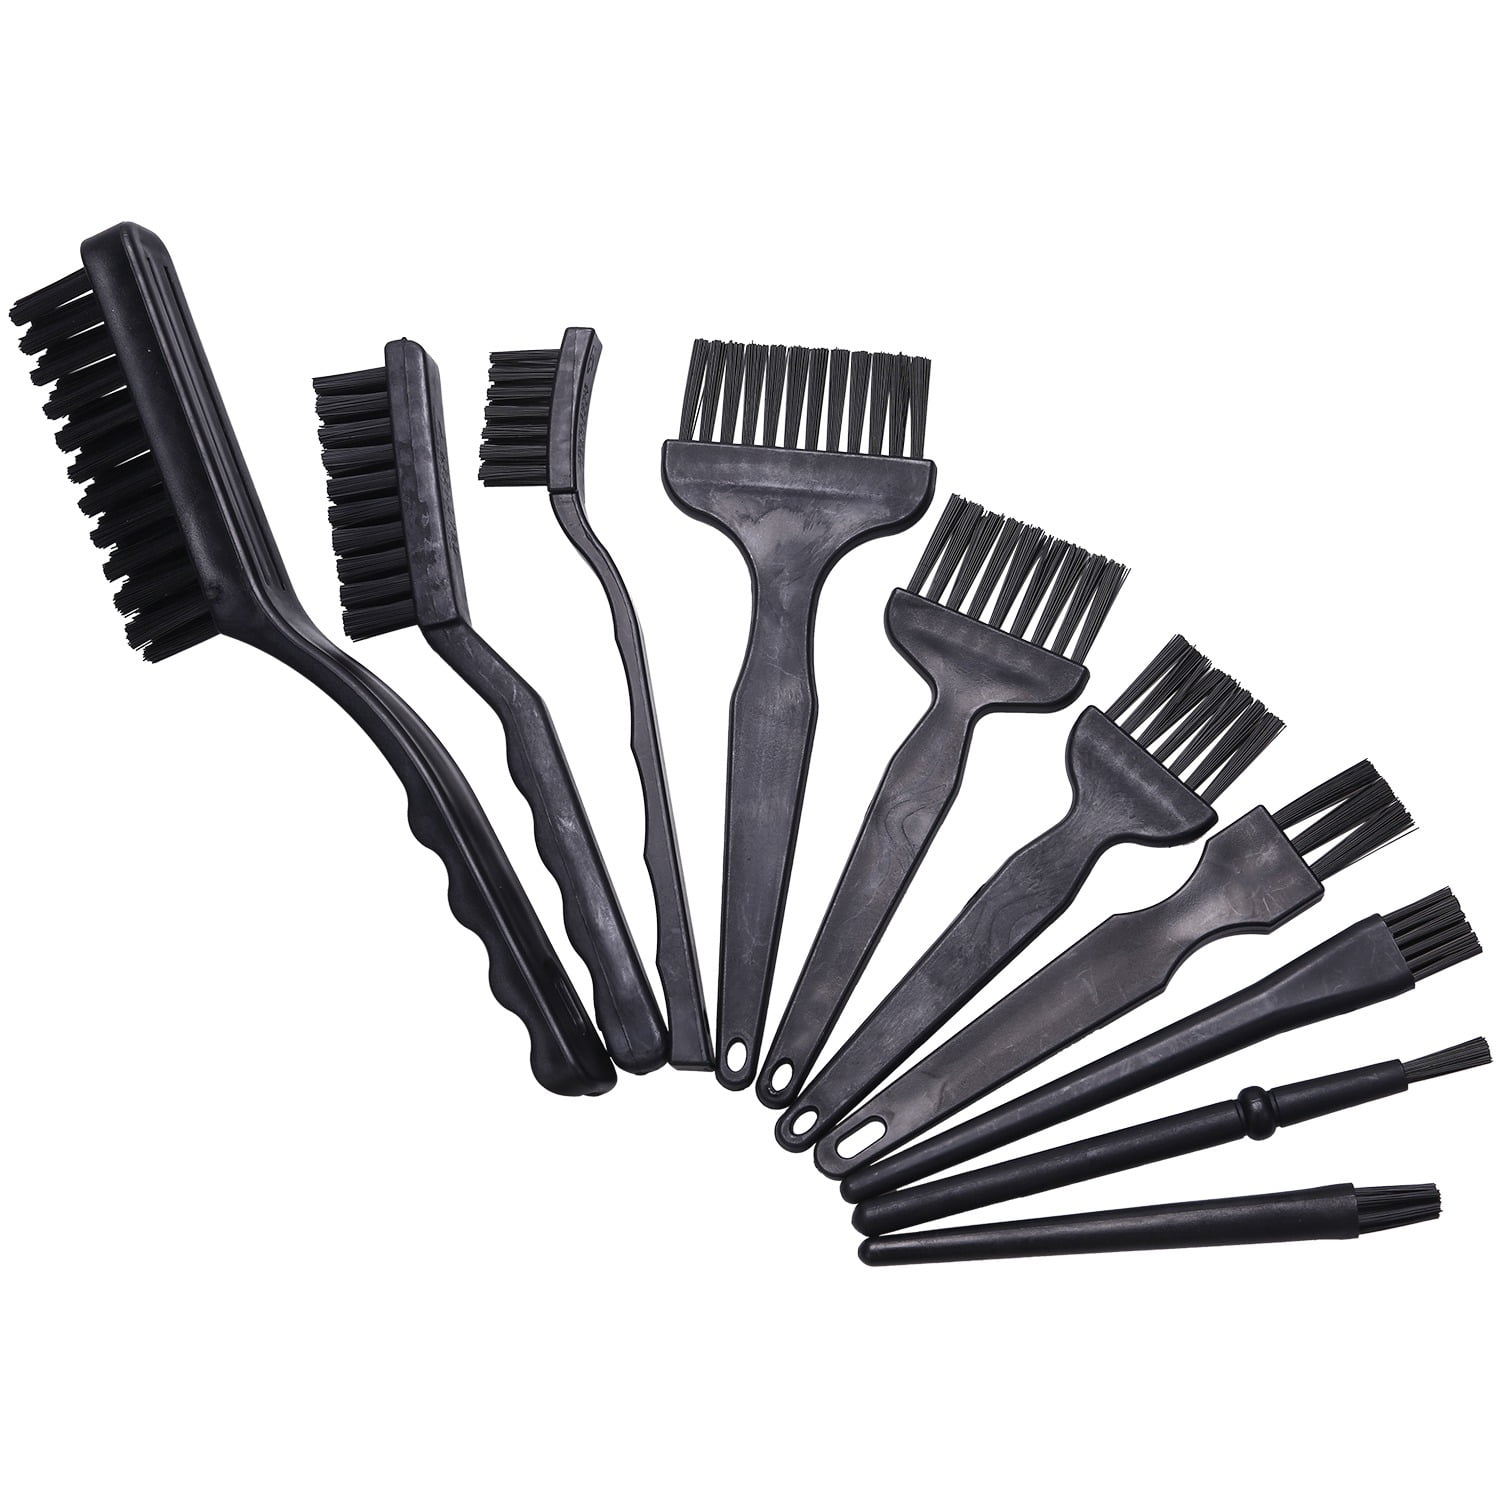 Hemobllo Anti Static Brush Double Head ESD Safe Applicator Brush Details Cleaning Brush for Mobile Phone Computer Motherboards Fans Keyboards 